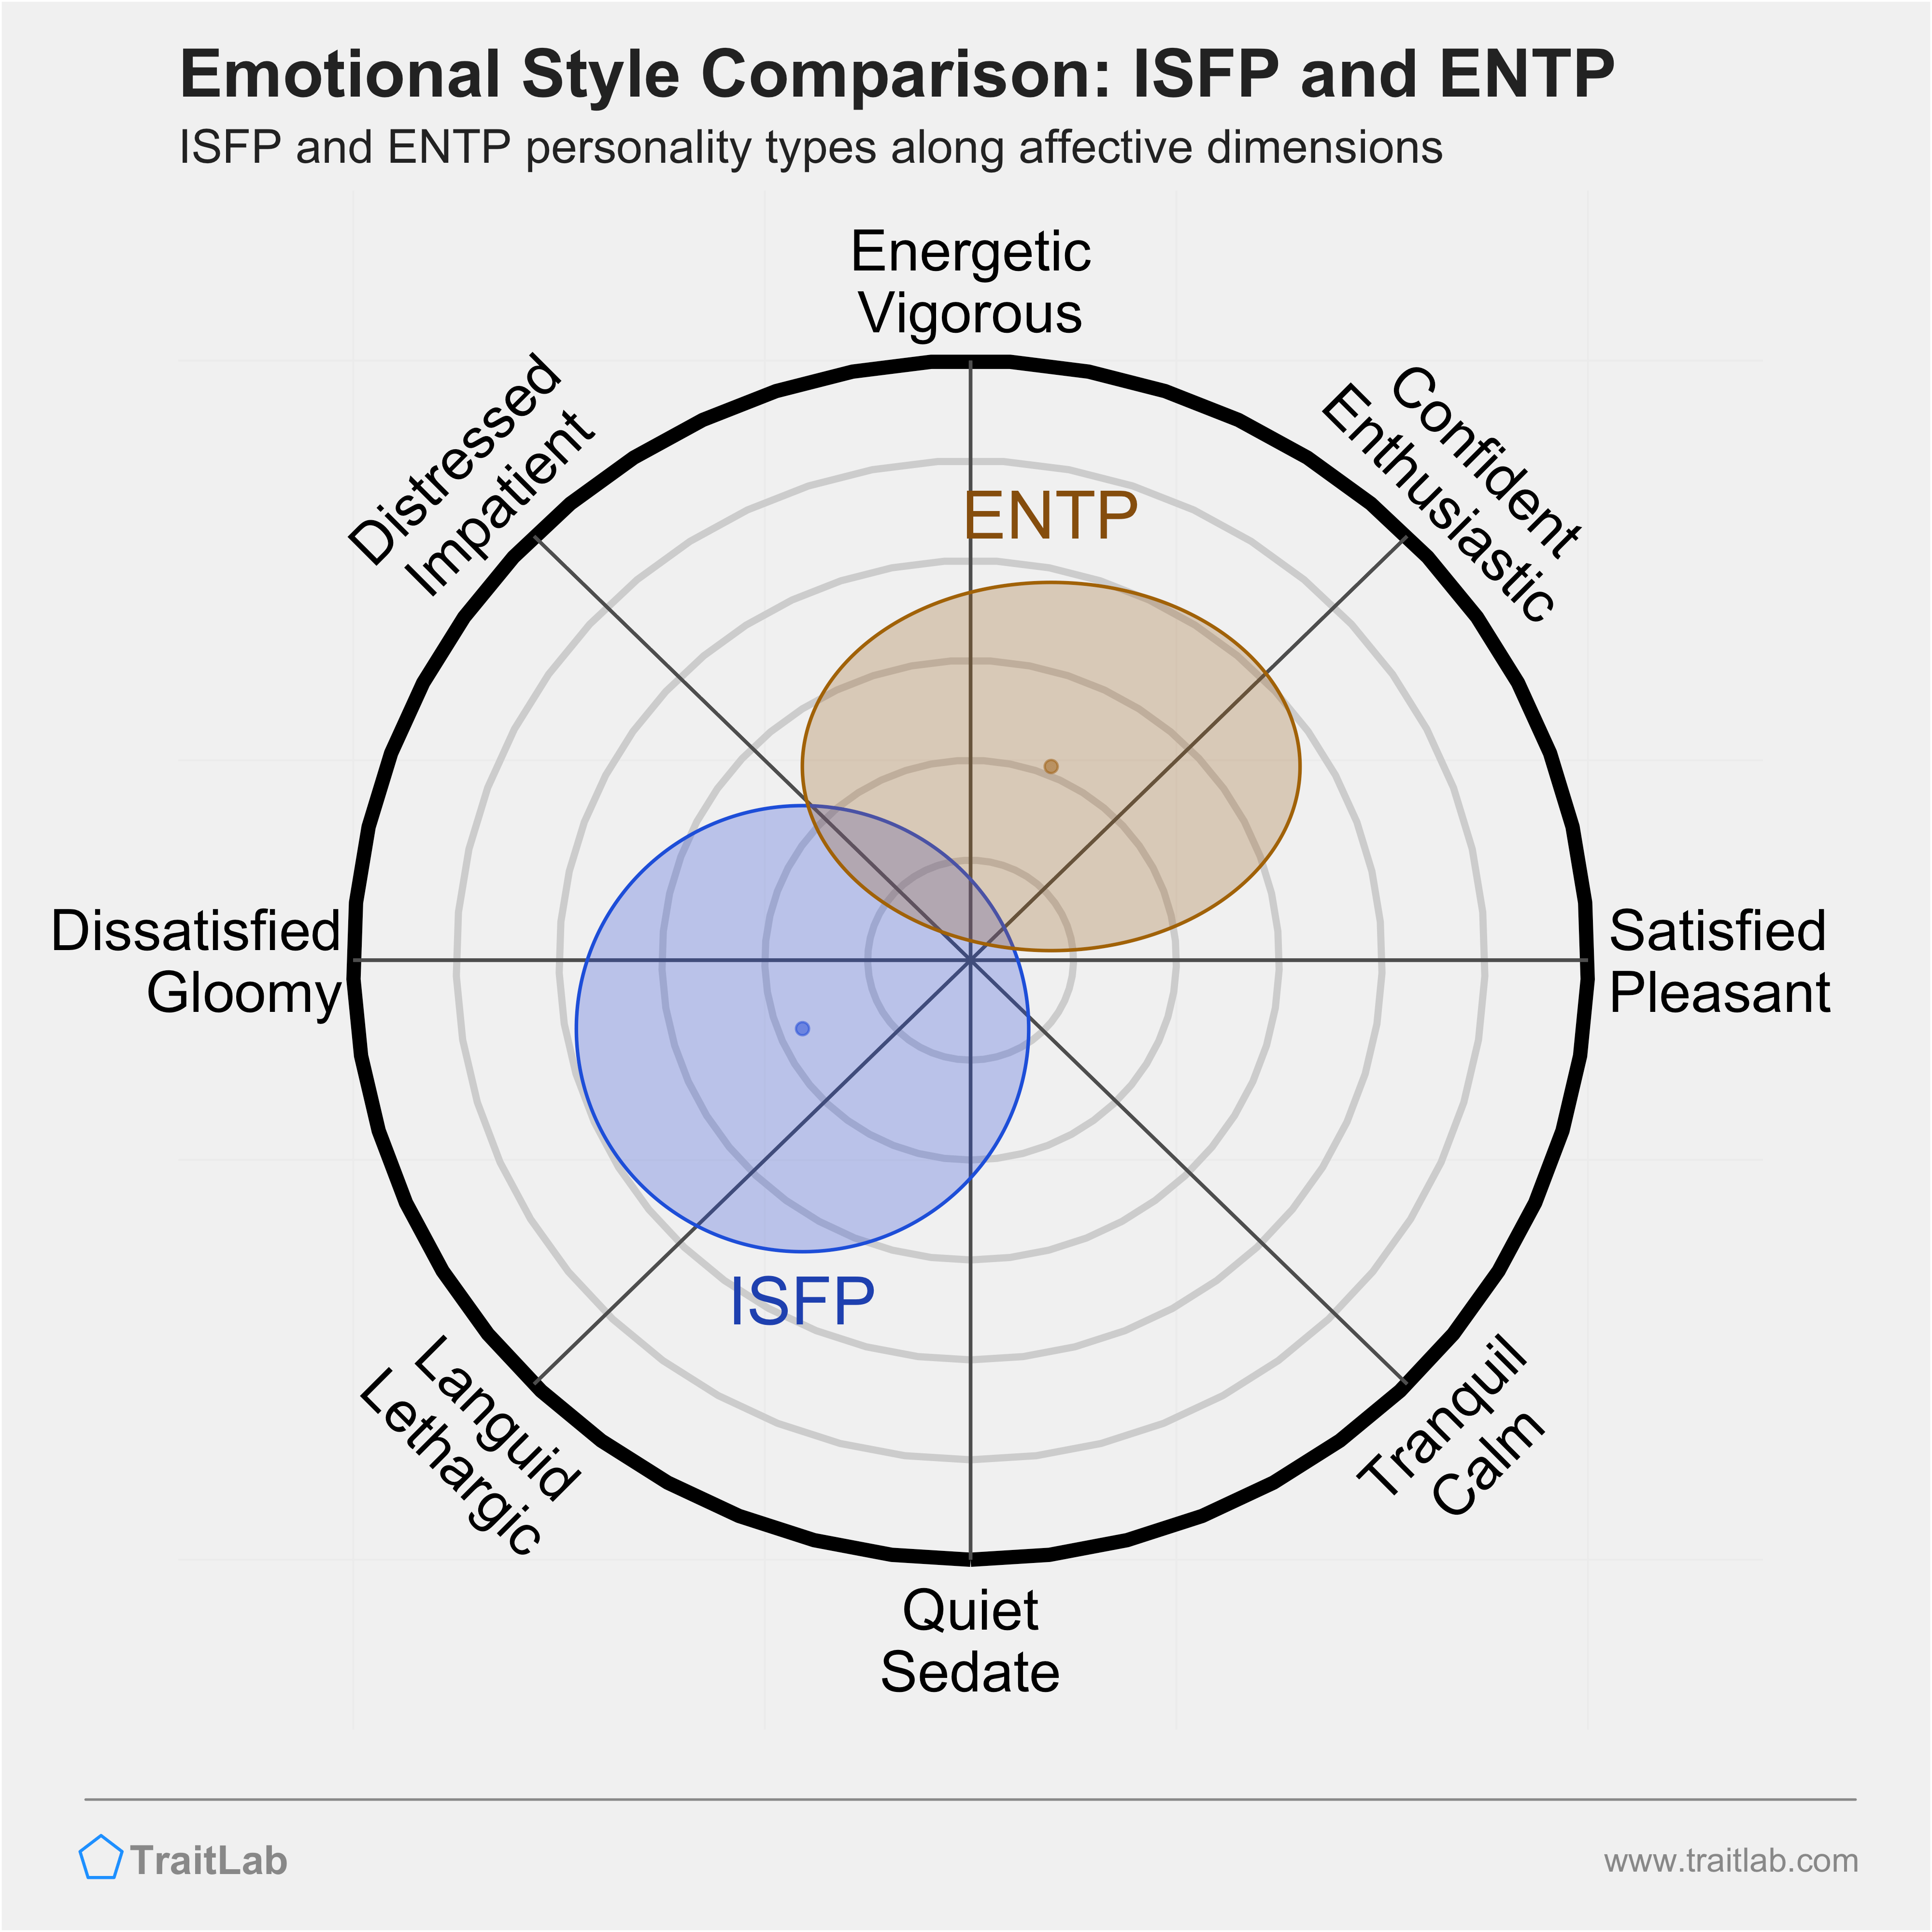 ISFP and ENTP comparison across emotional (affective) dimensions